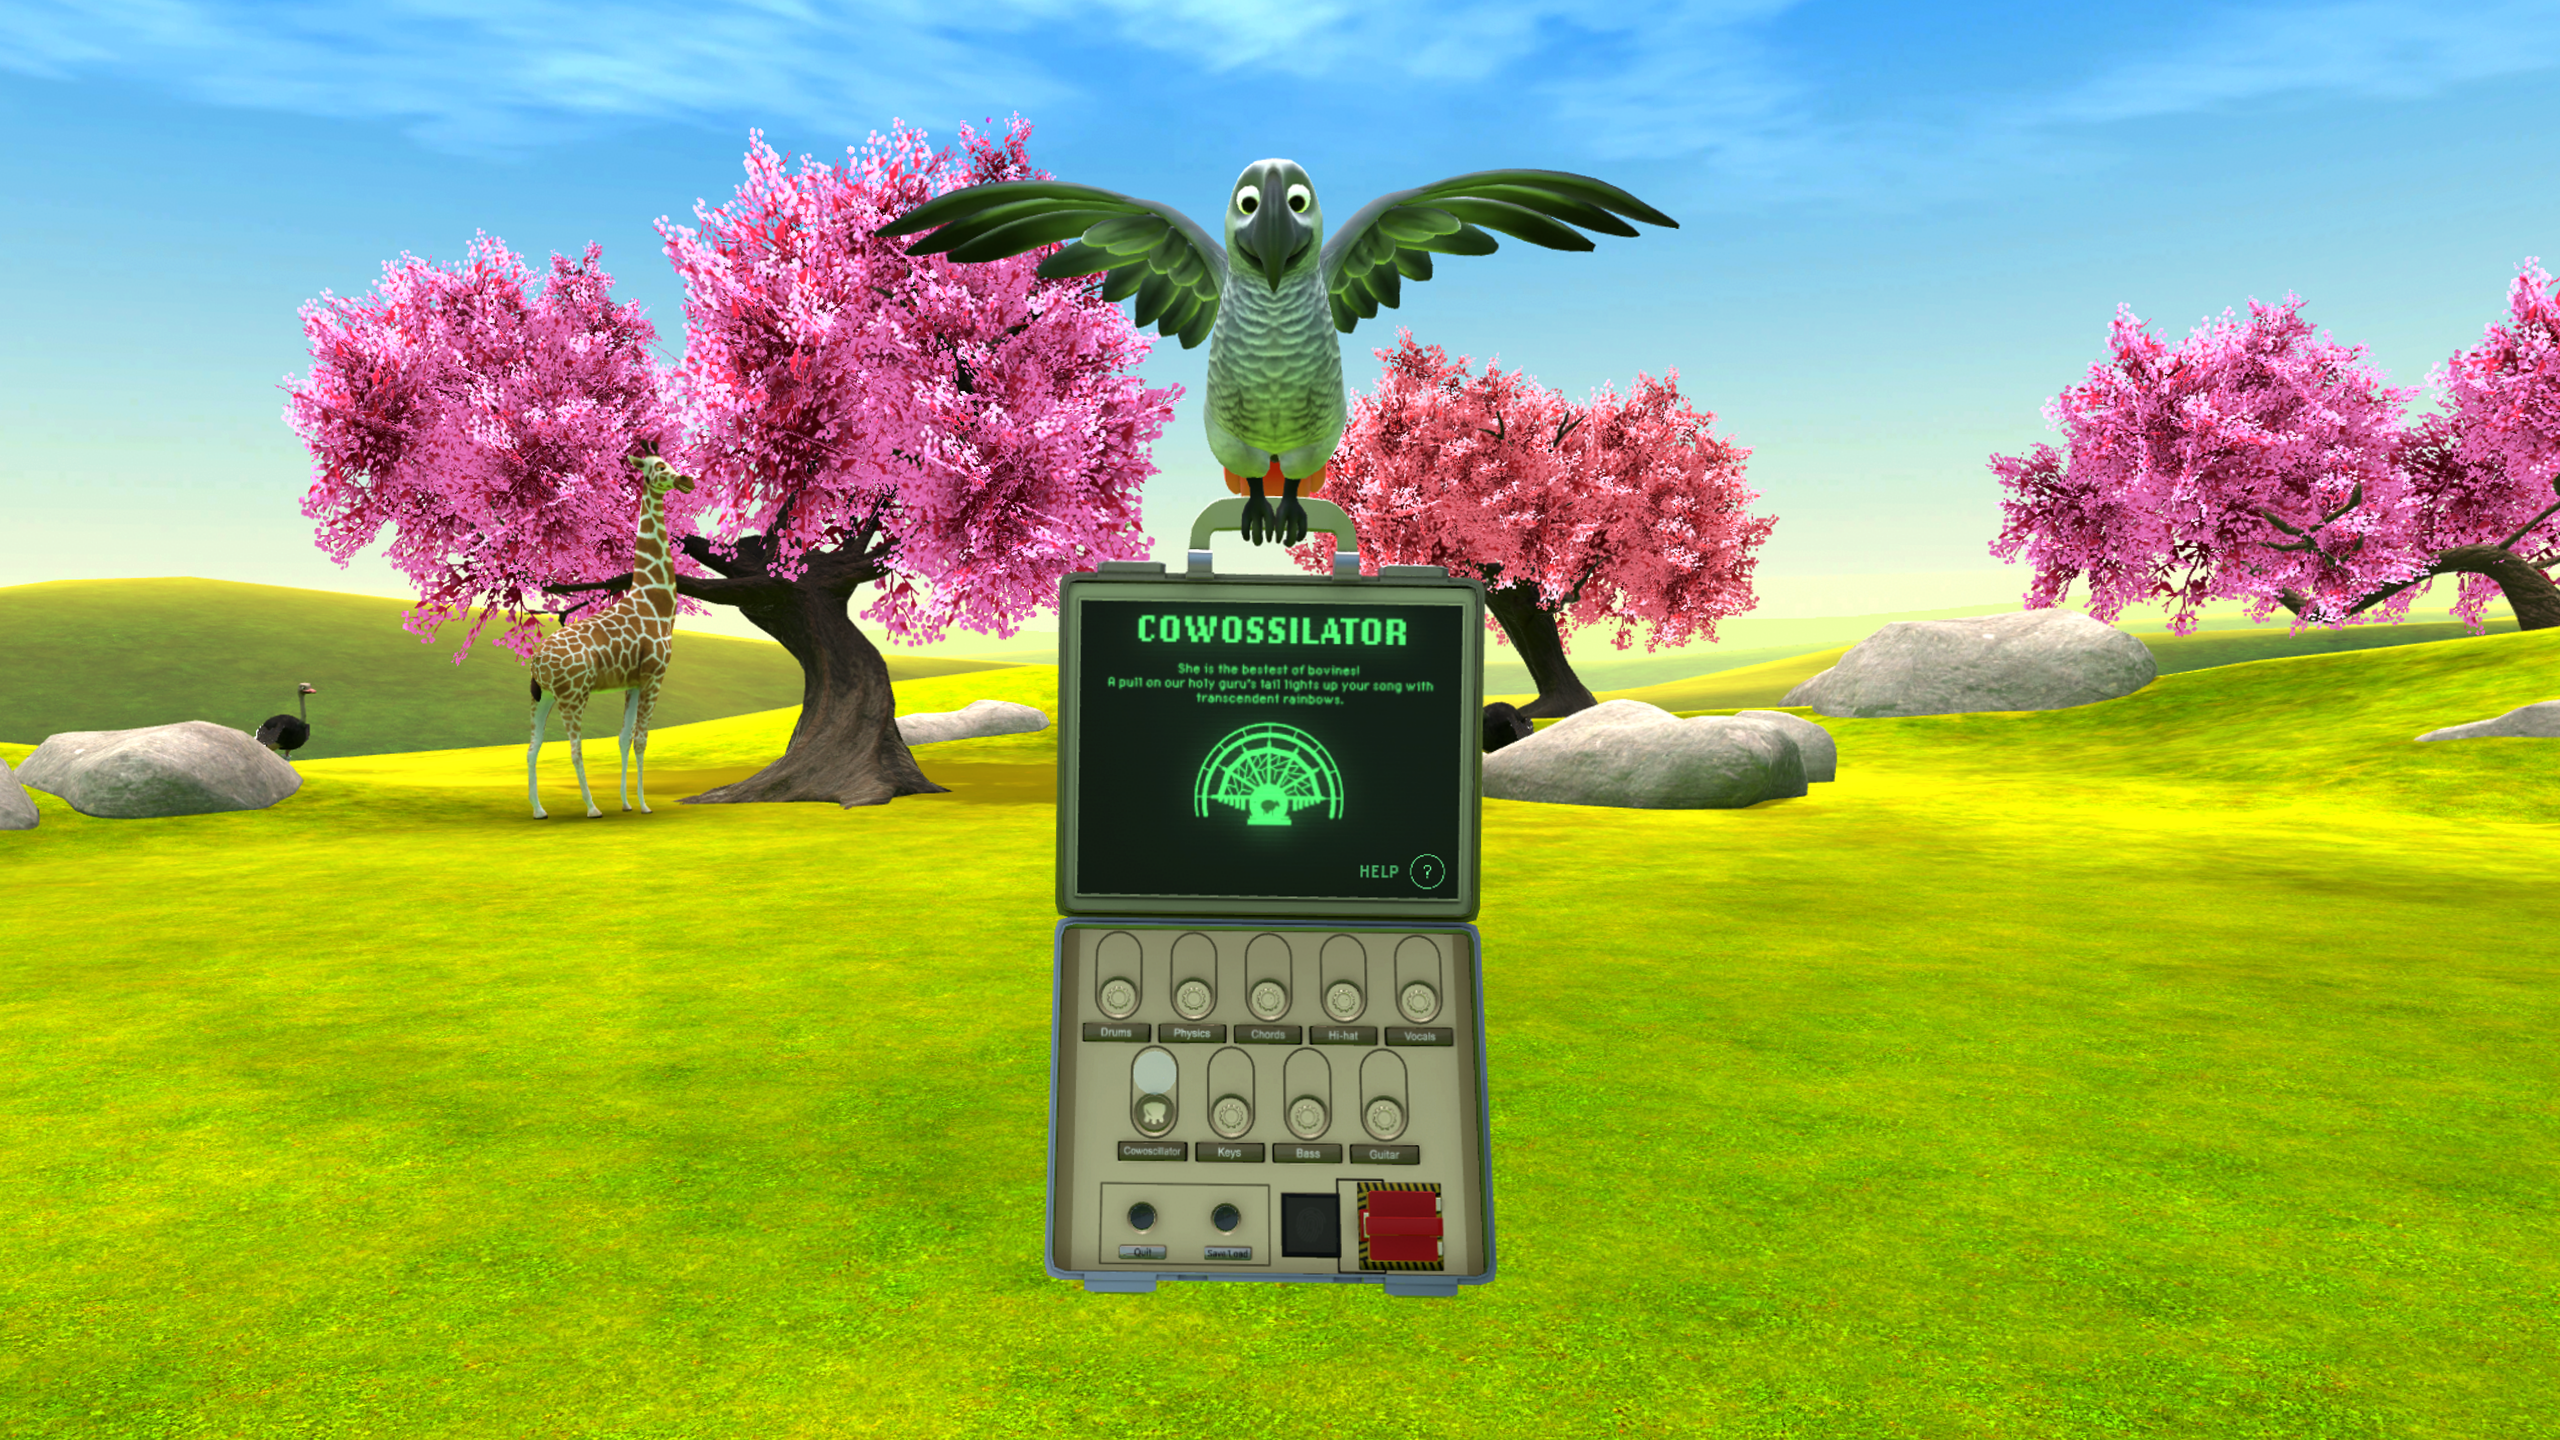 A parrot flying in the air with the handle of a briefcase in its claws. The briefcase is open, showing a computer screen with an instruction displayed.